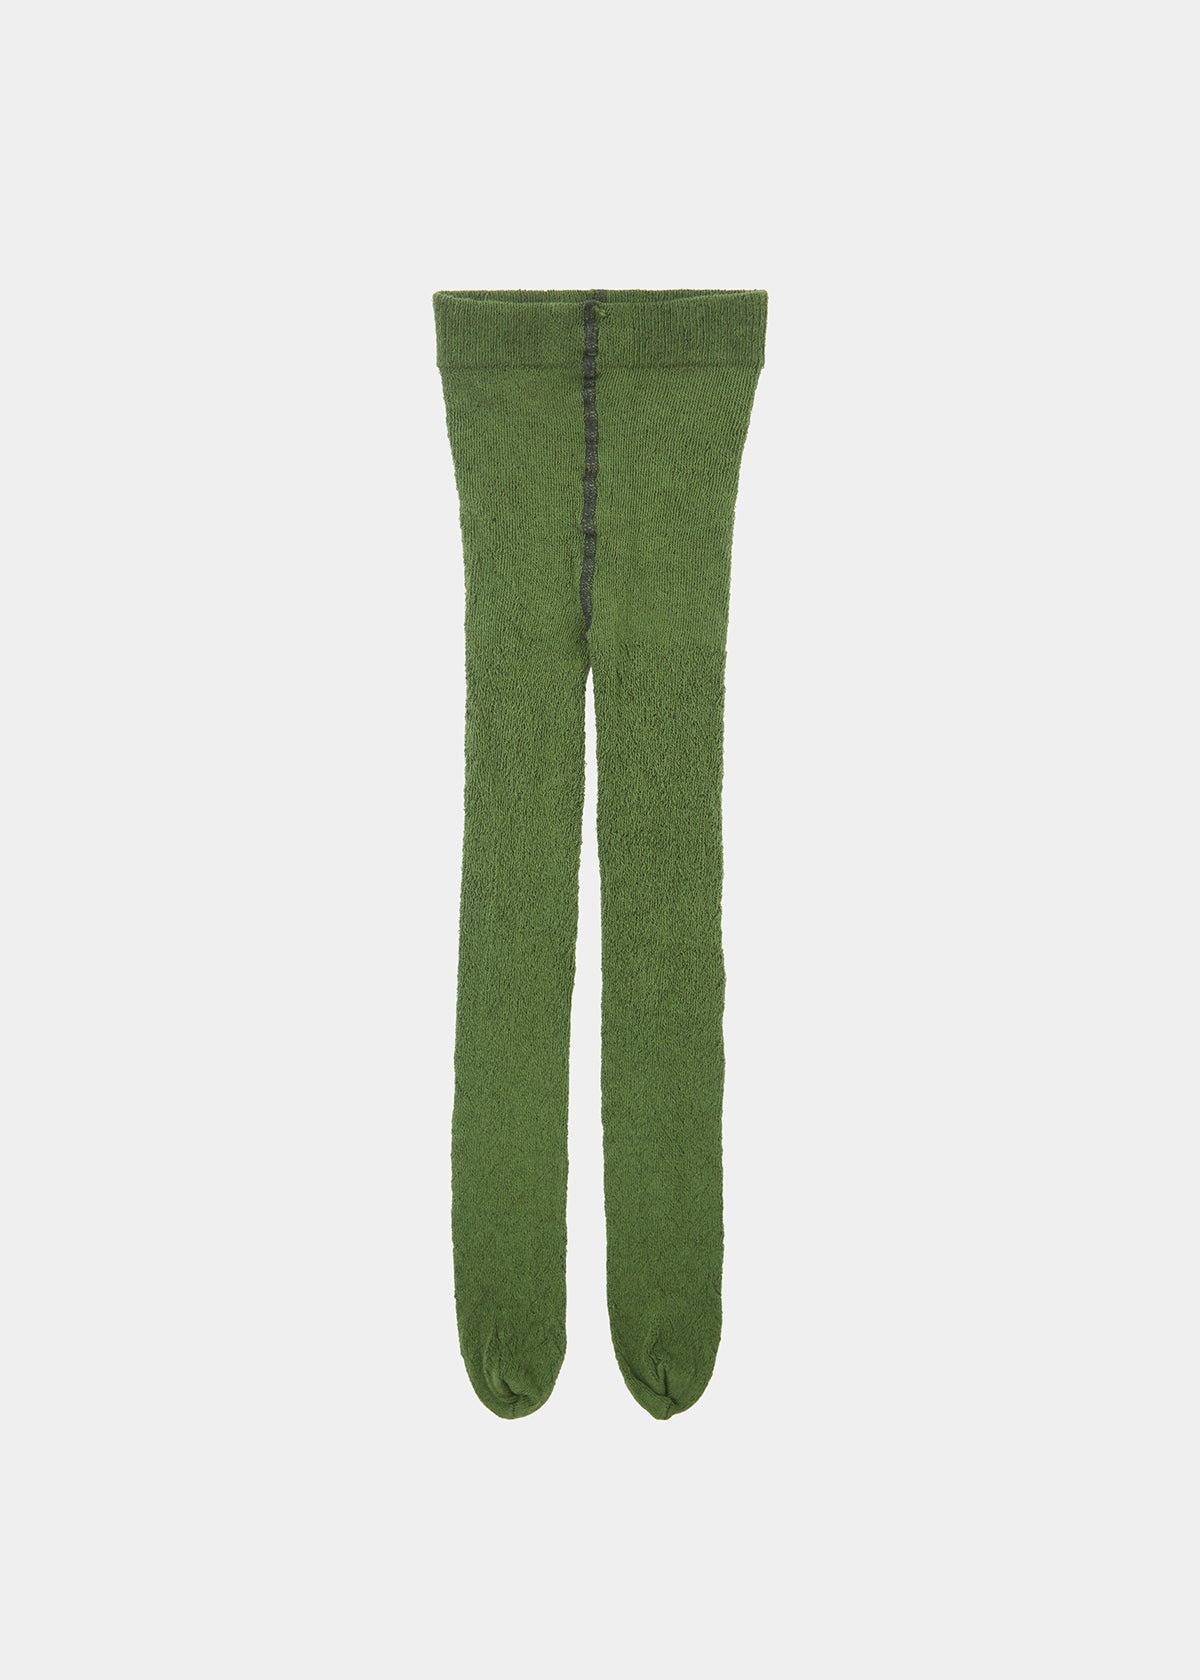 POINTELLE TIGHTS - FOREST GREEN (FRONT)